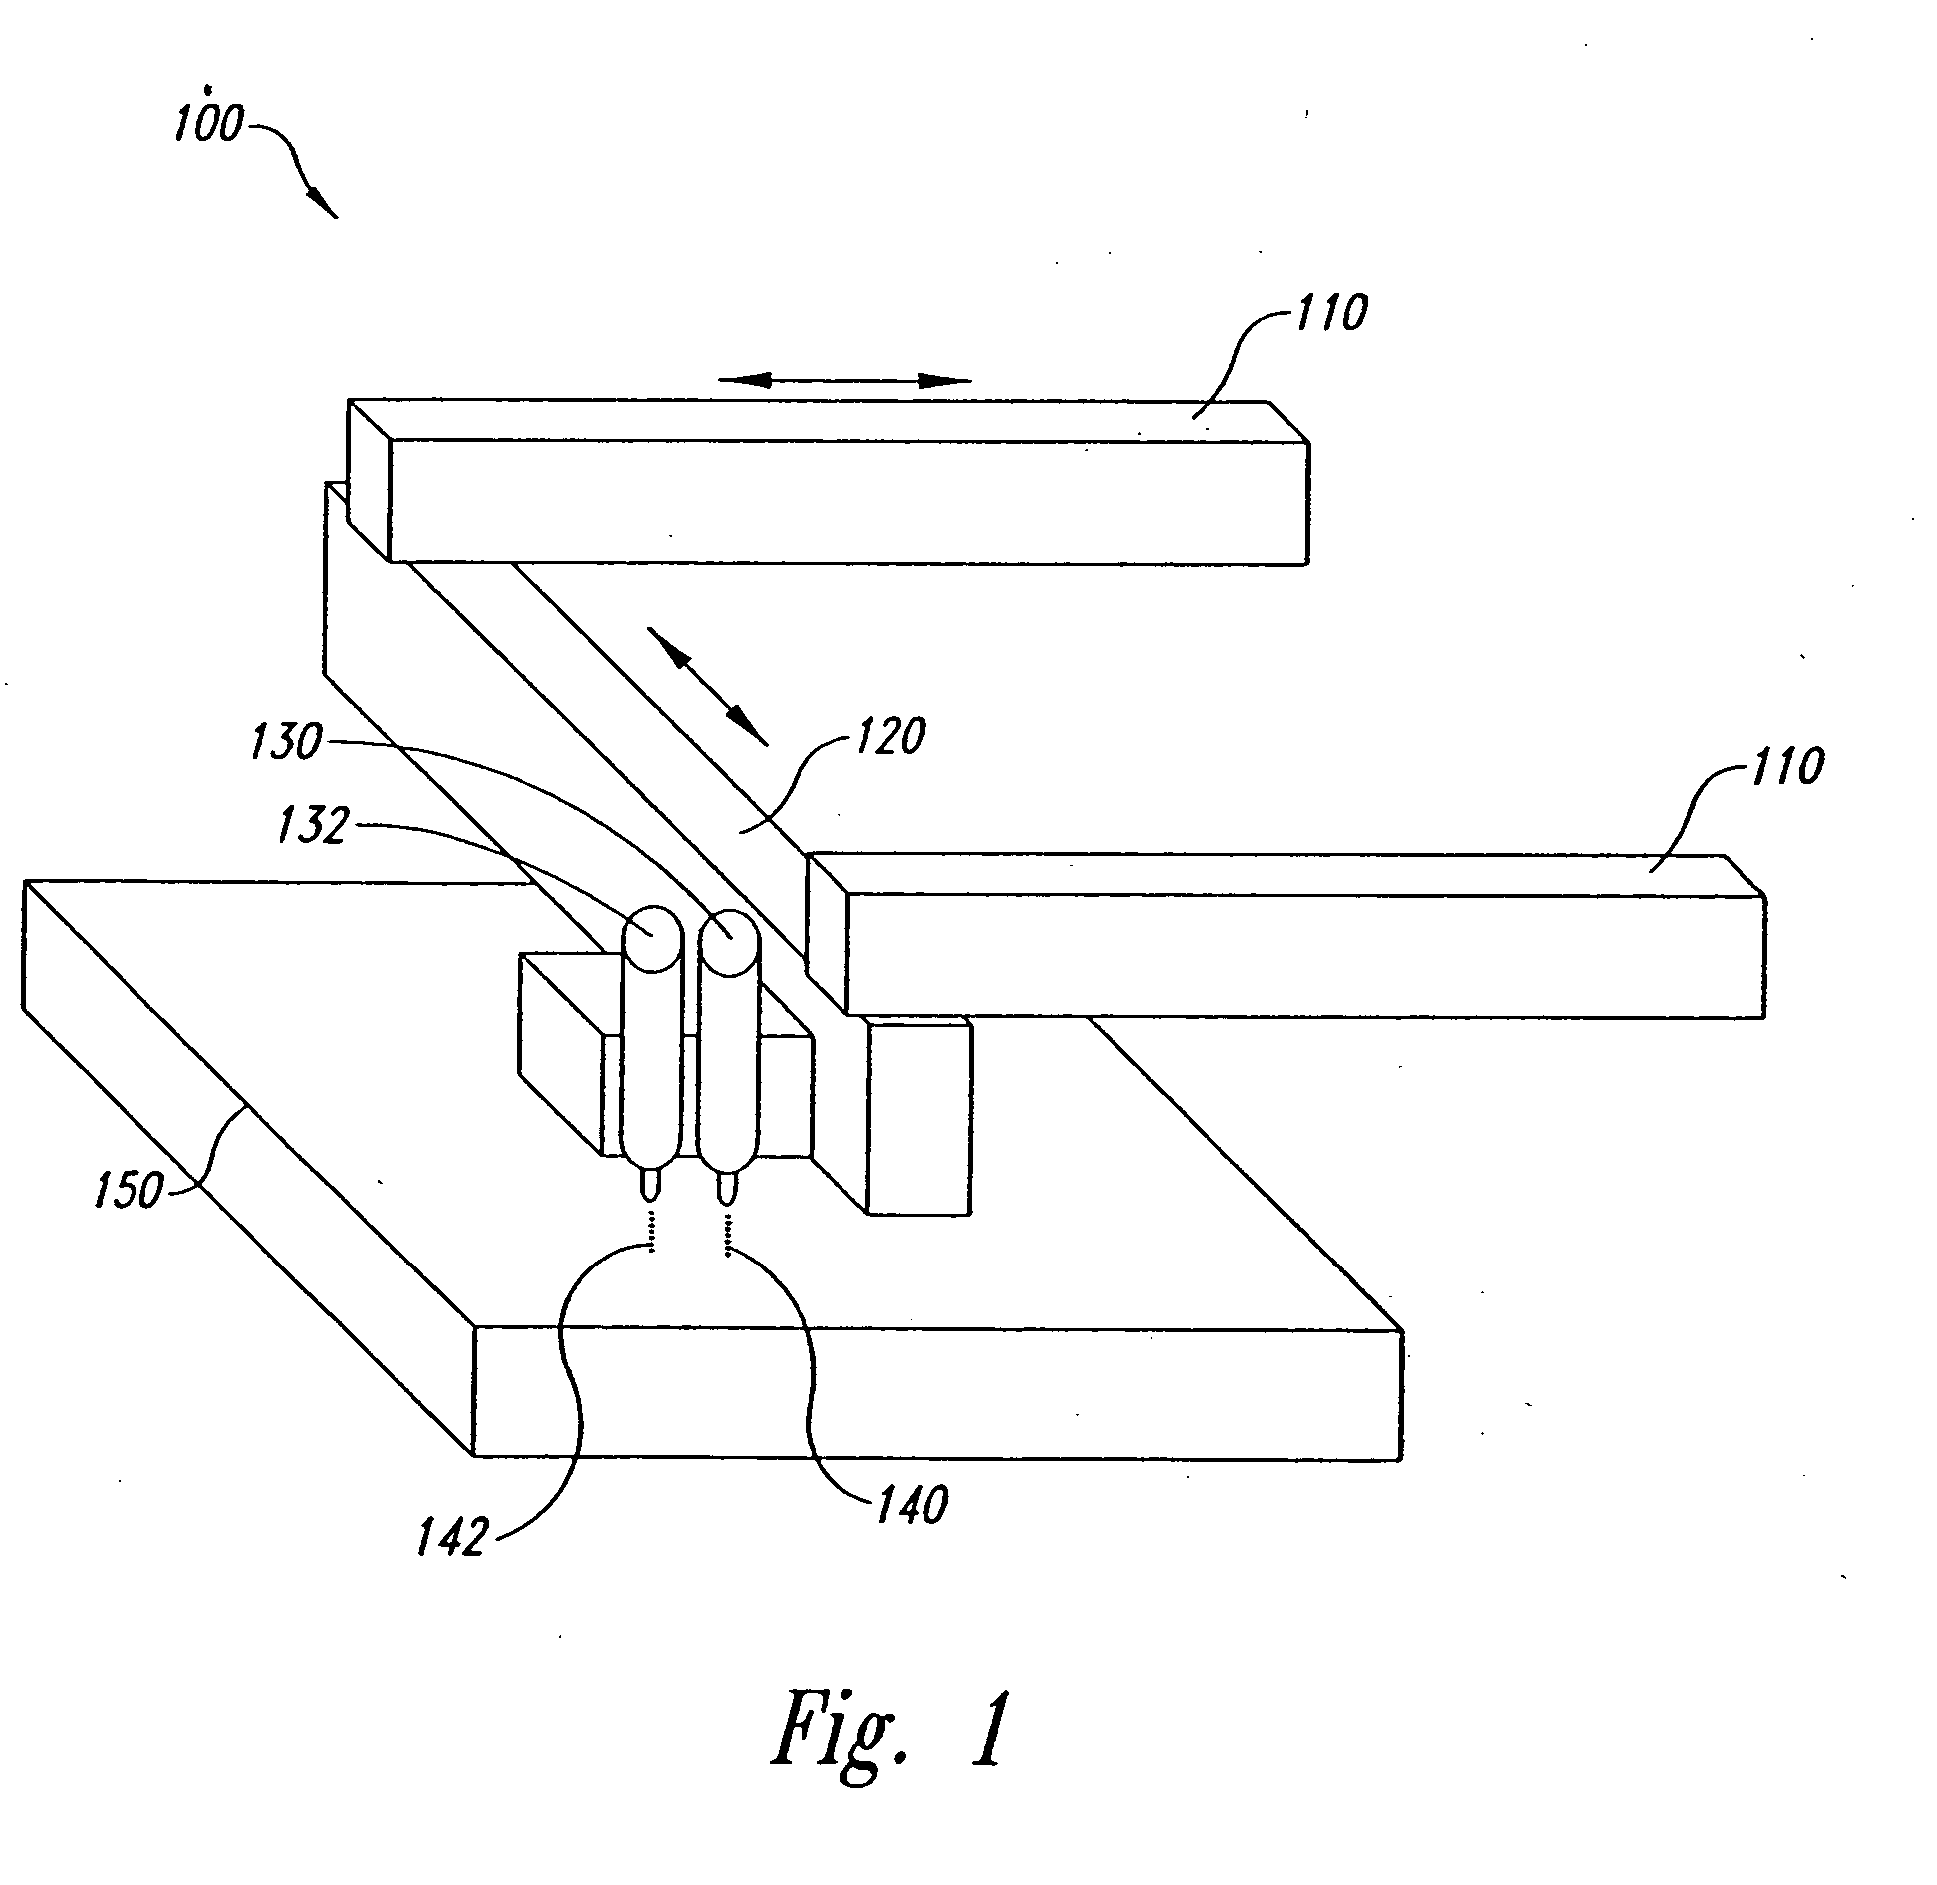 Method and form of a drug delivery device, such as encapsulating a toxic core within a non-toxic region in an oral dosage form